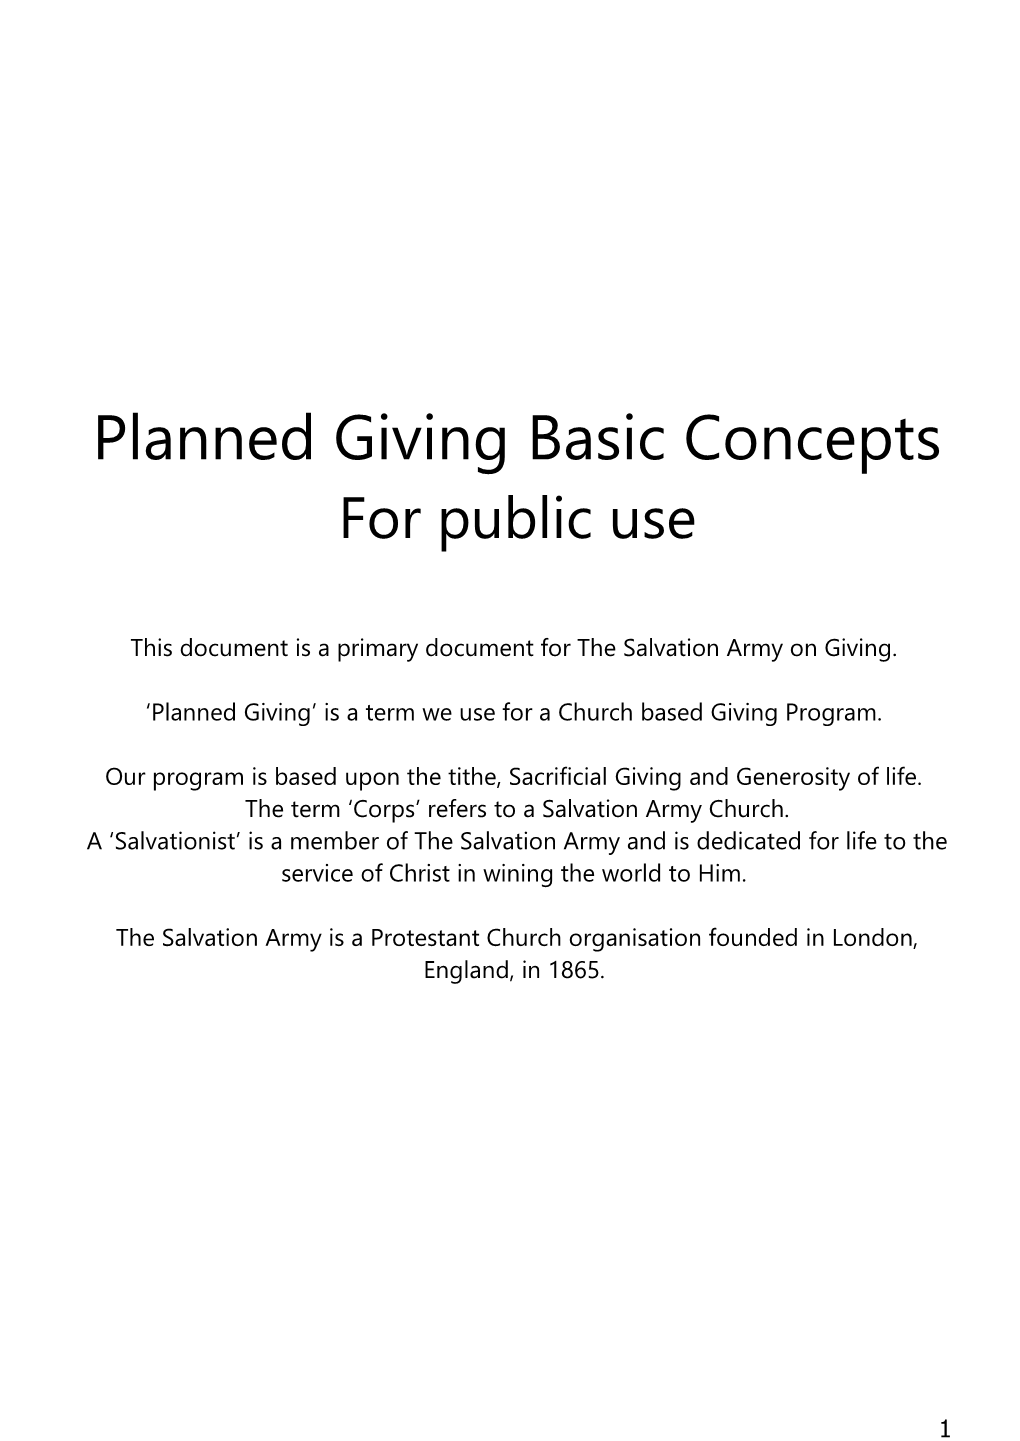 Planned Giving Basic Concepts